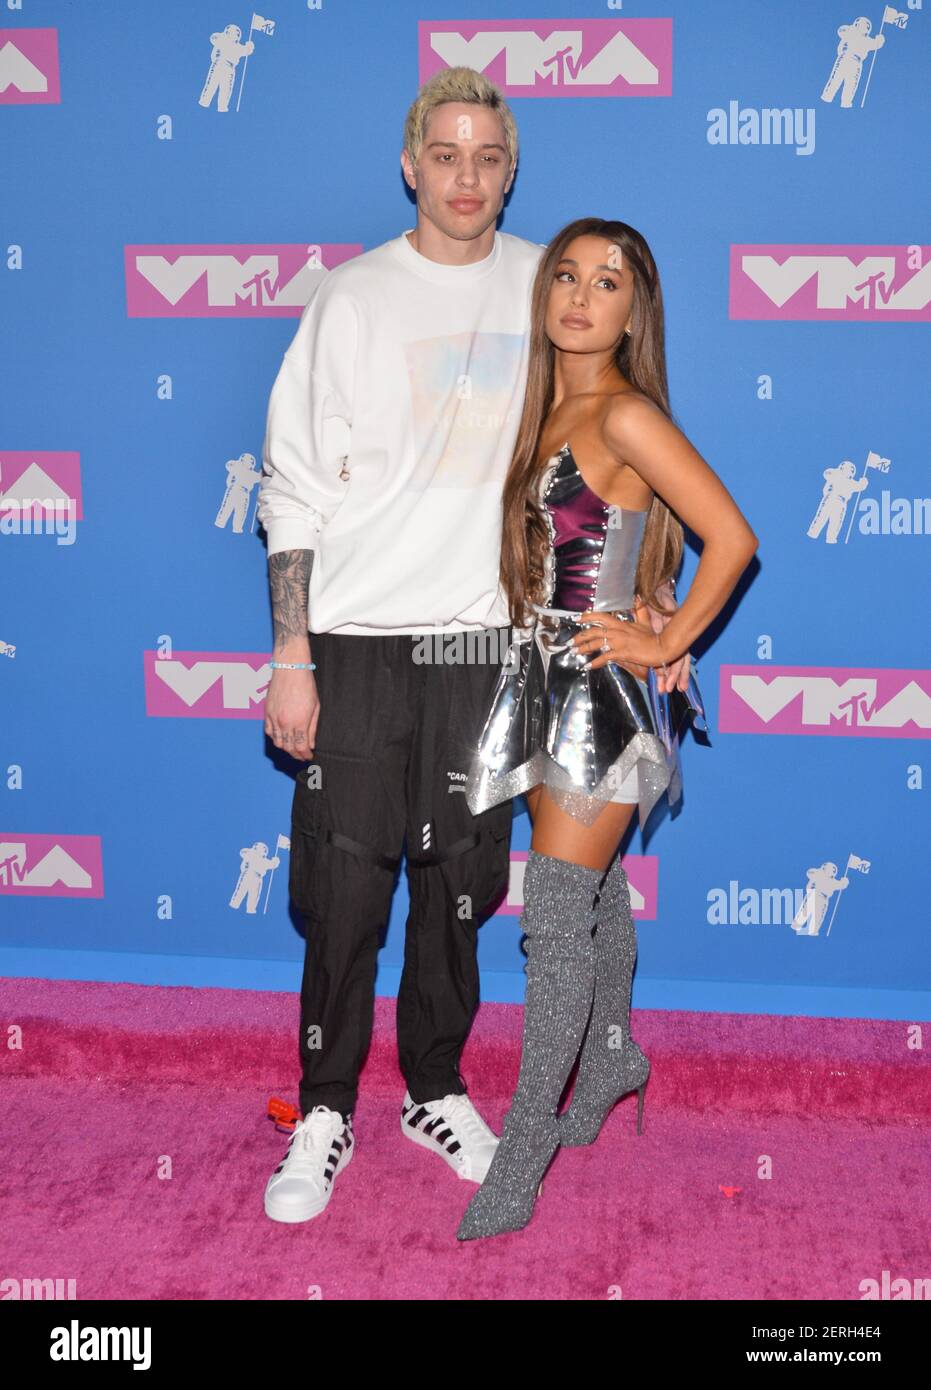 Ariana Grande andPete Davidson walking on the red carpet at The 2018 MTV  Video Music Awards held at Radio City Music Hall in New York, NY on August  20, 2018. (Photo by